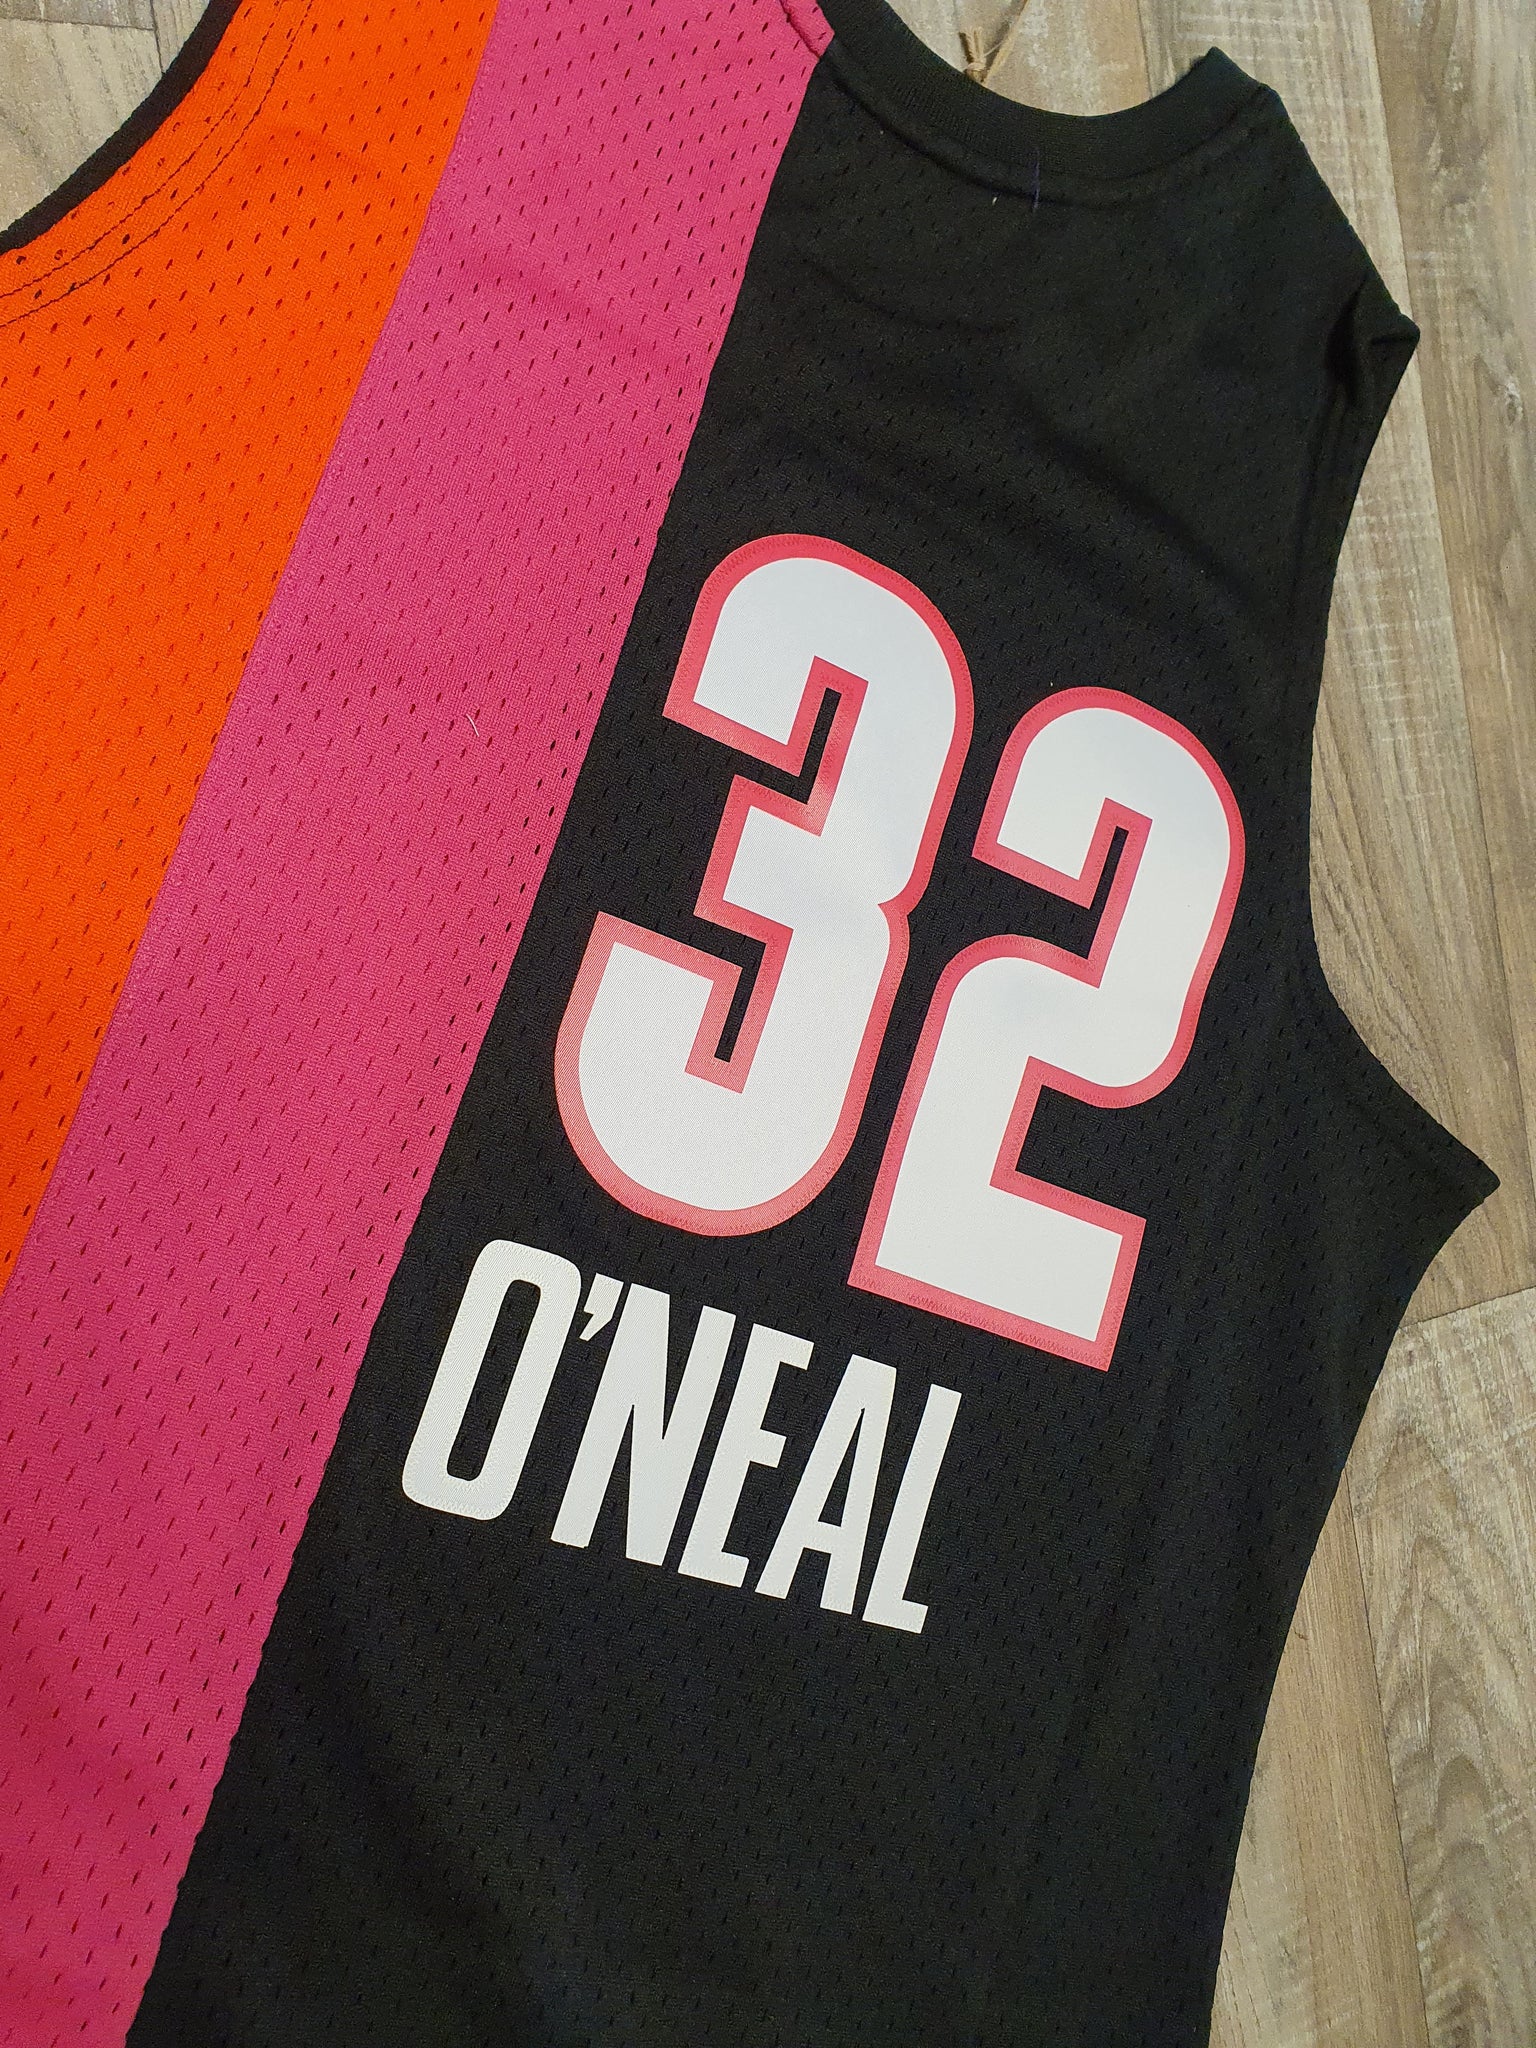 Shaquille O'neal Miami Heat 2005-06 Authentic Signed Mitchell